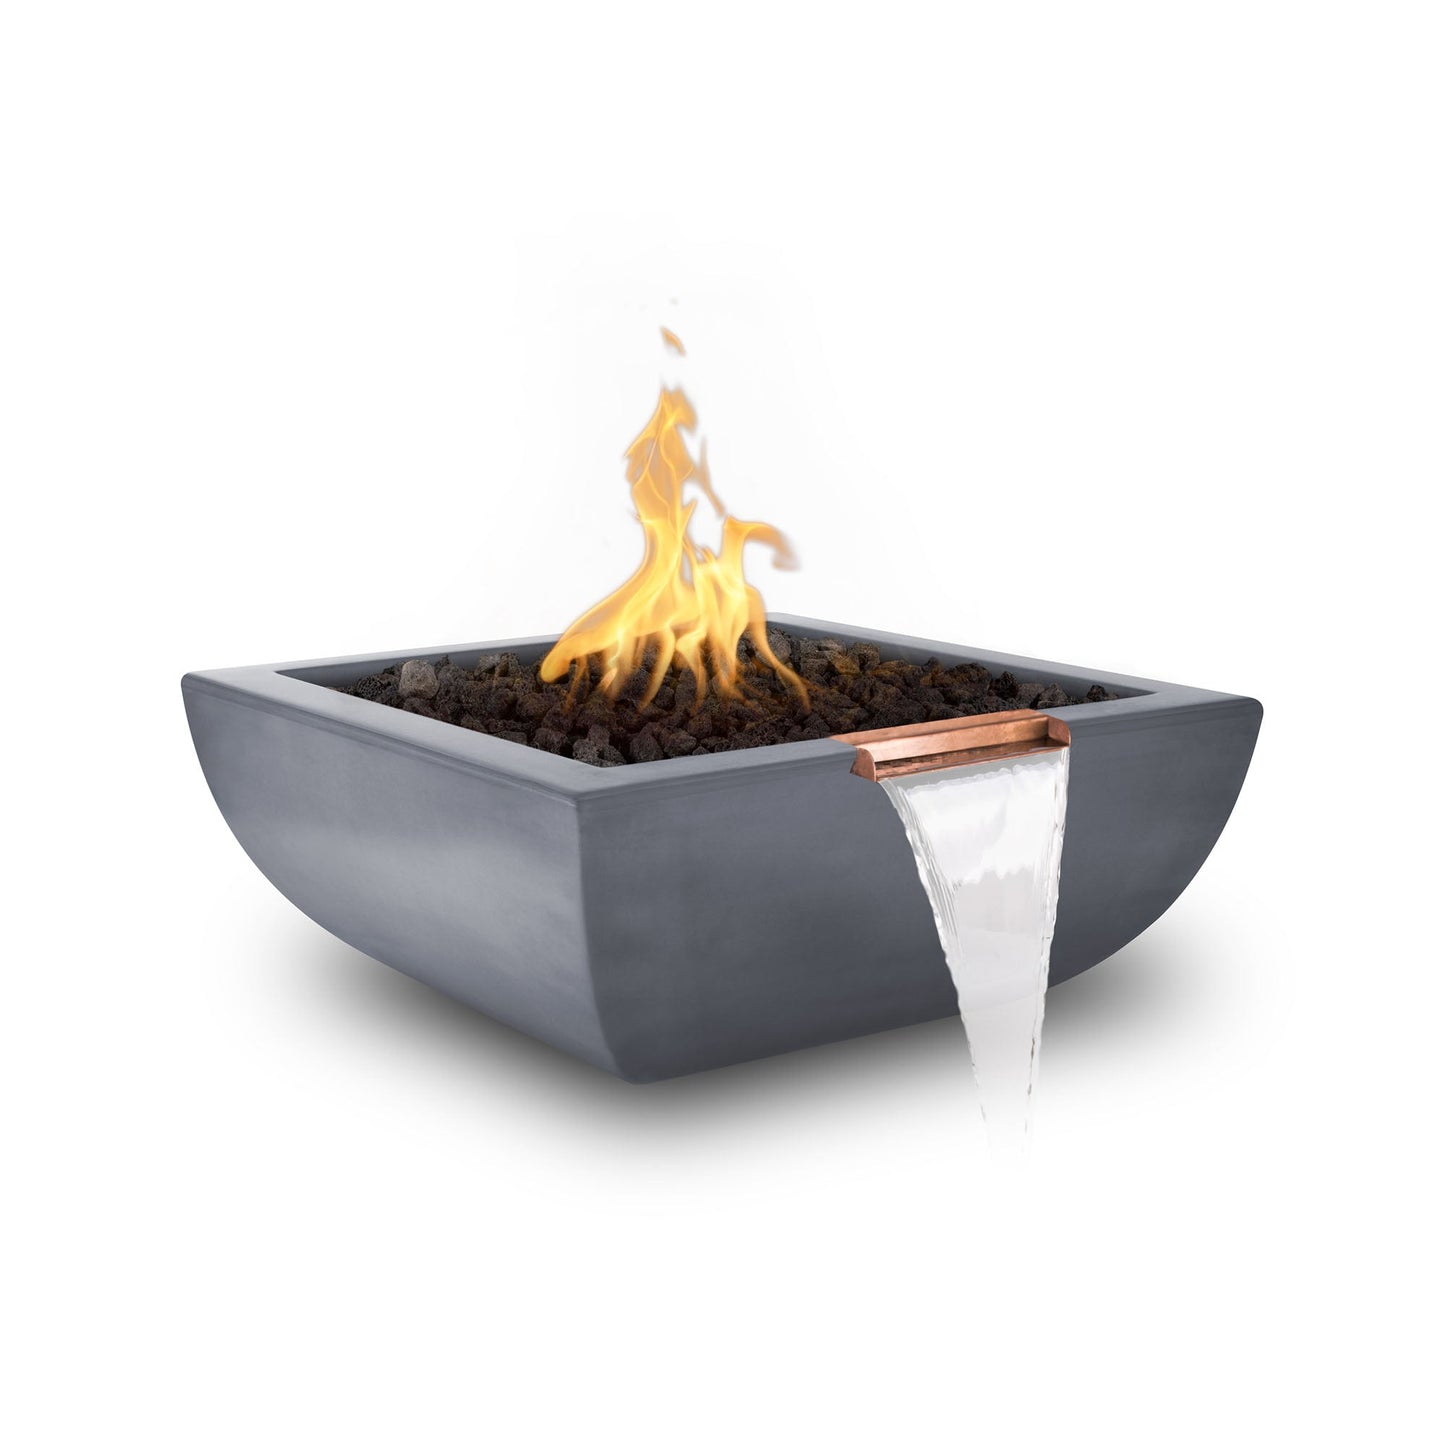 The Outdoor Plus Square Avalon 24" Gray GFRC Concrete Natural Gas Fire & Water Bowl with Match Lit with Flame Sense Ignition